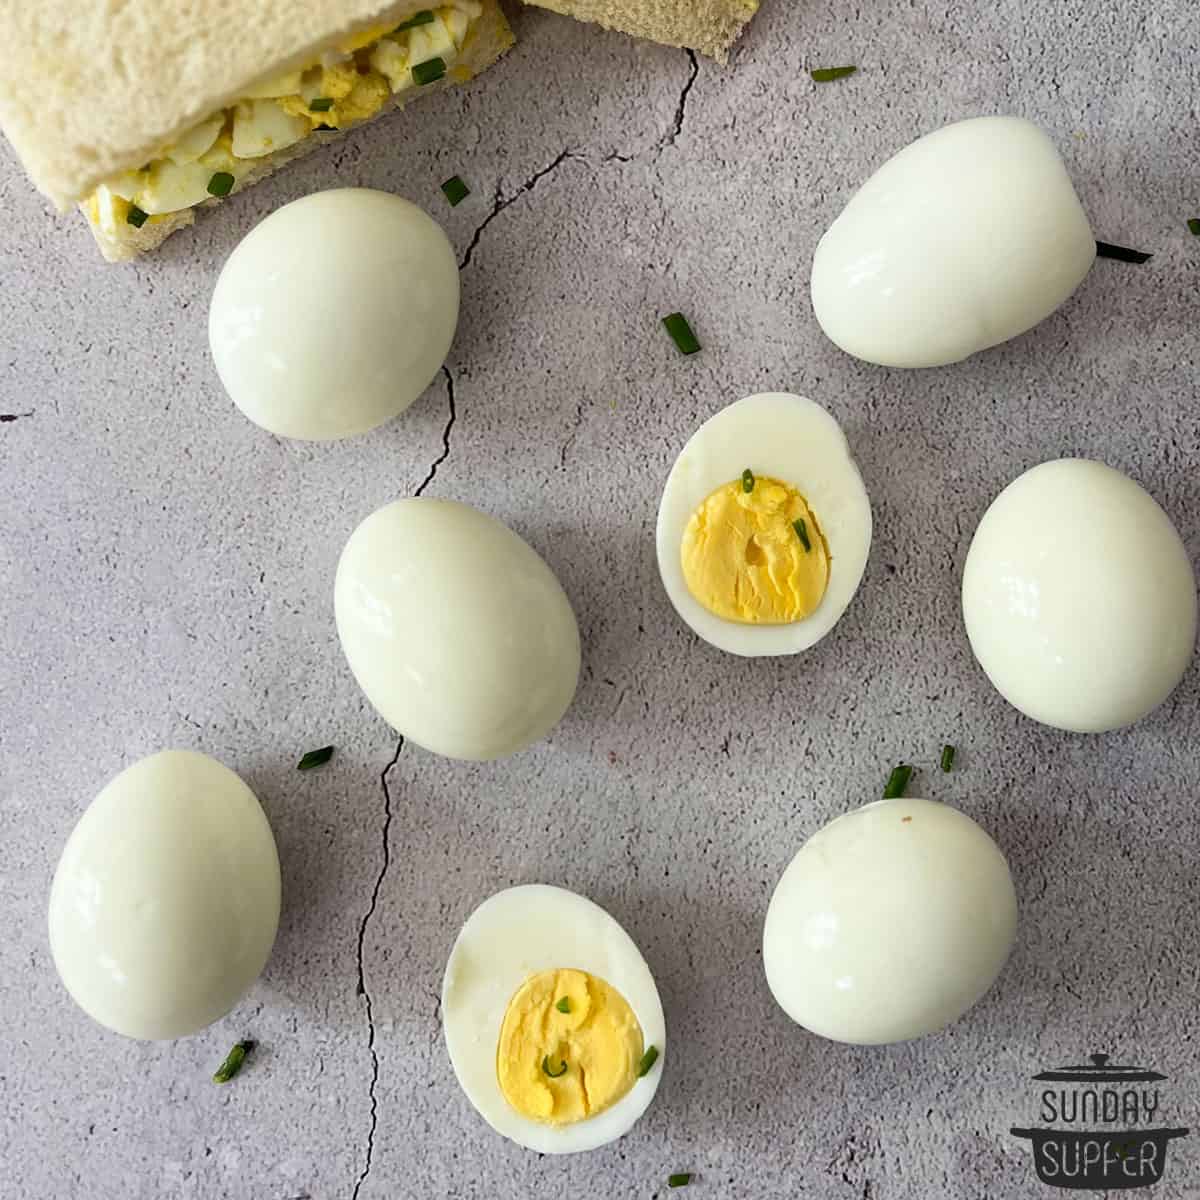 sliced and whole hard boiled eggs on a counter with a sandwich and chives